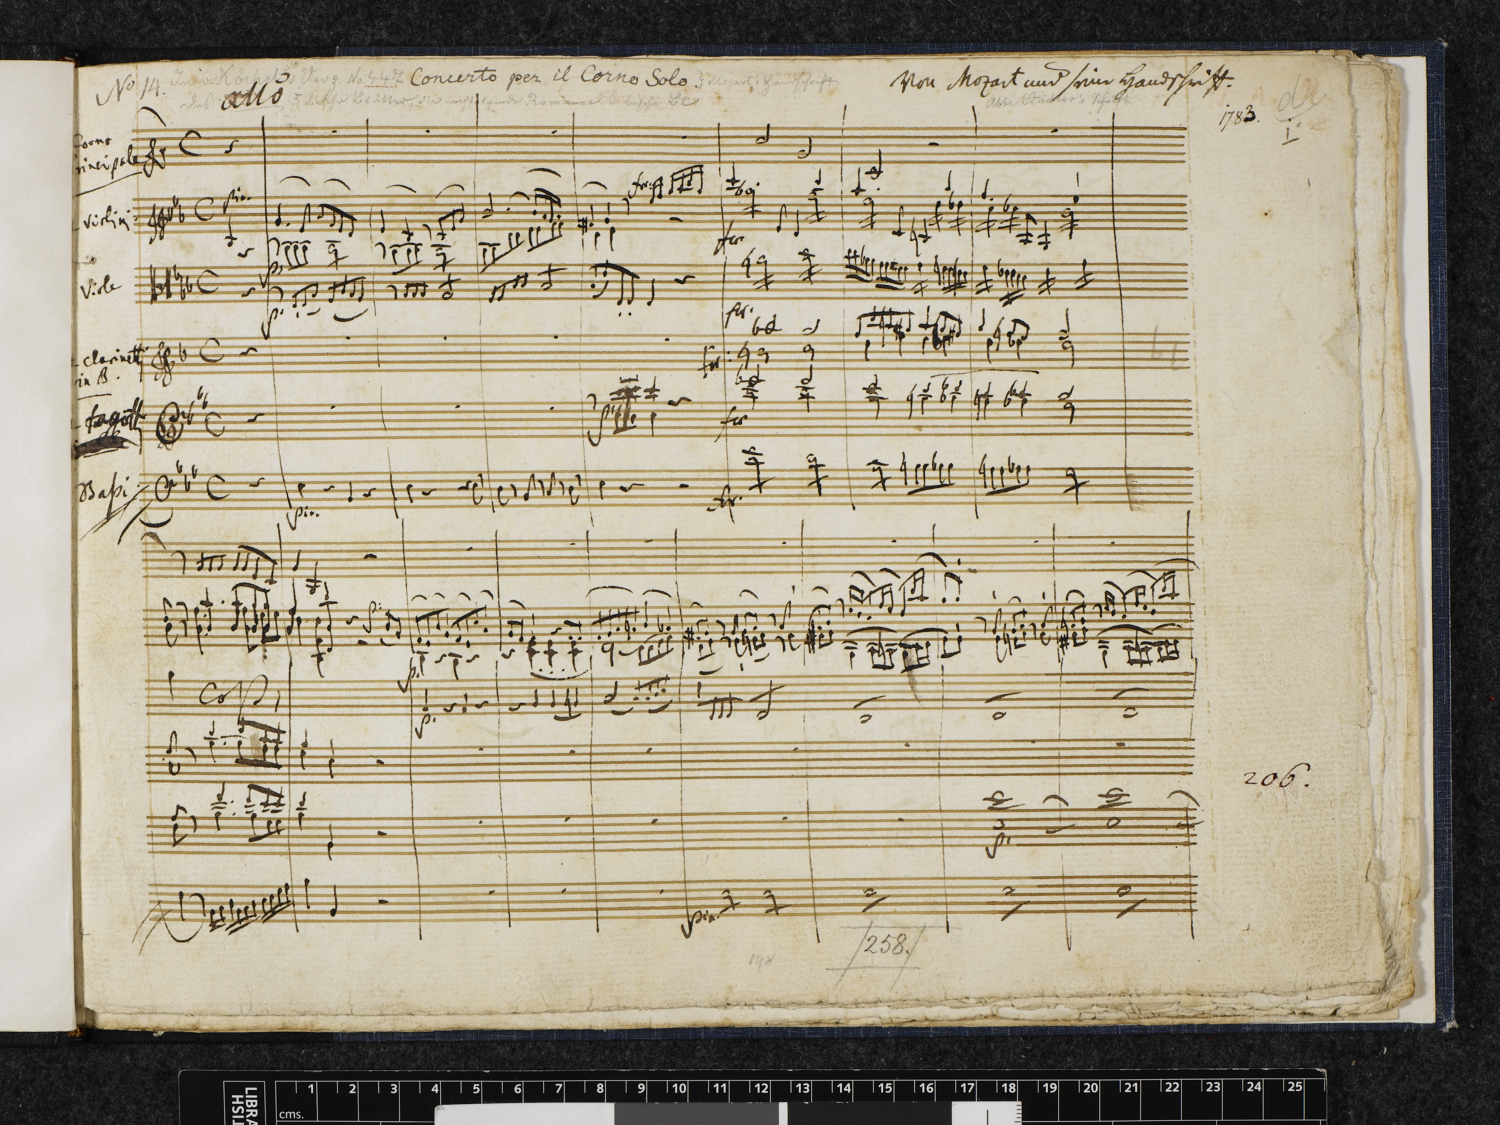 Moaart's Third Horn Concerto K447 from the Stefan Zweig collection at the British Library